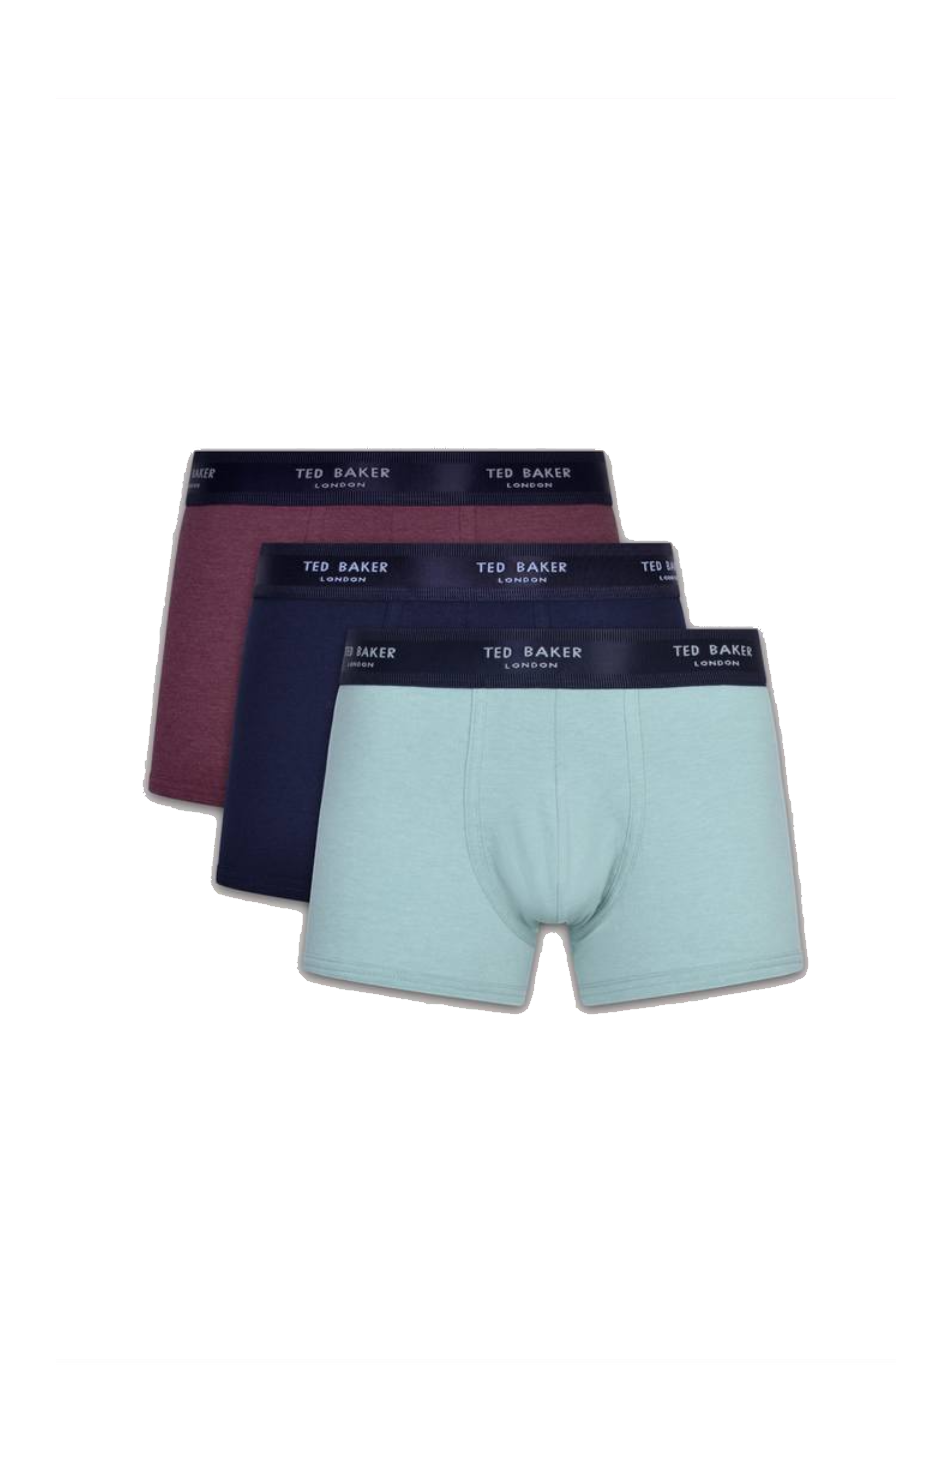 Ted Baker 3 Pack Cotton Fashion Men's Trunk